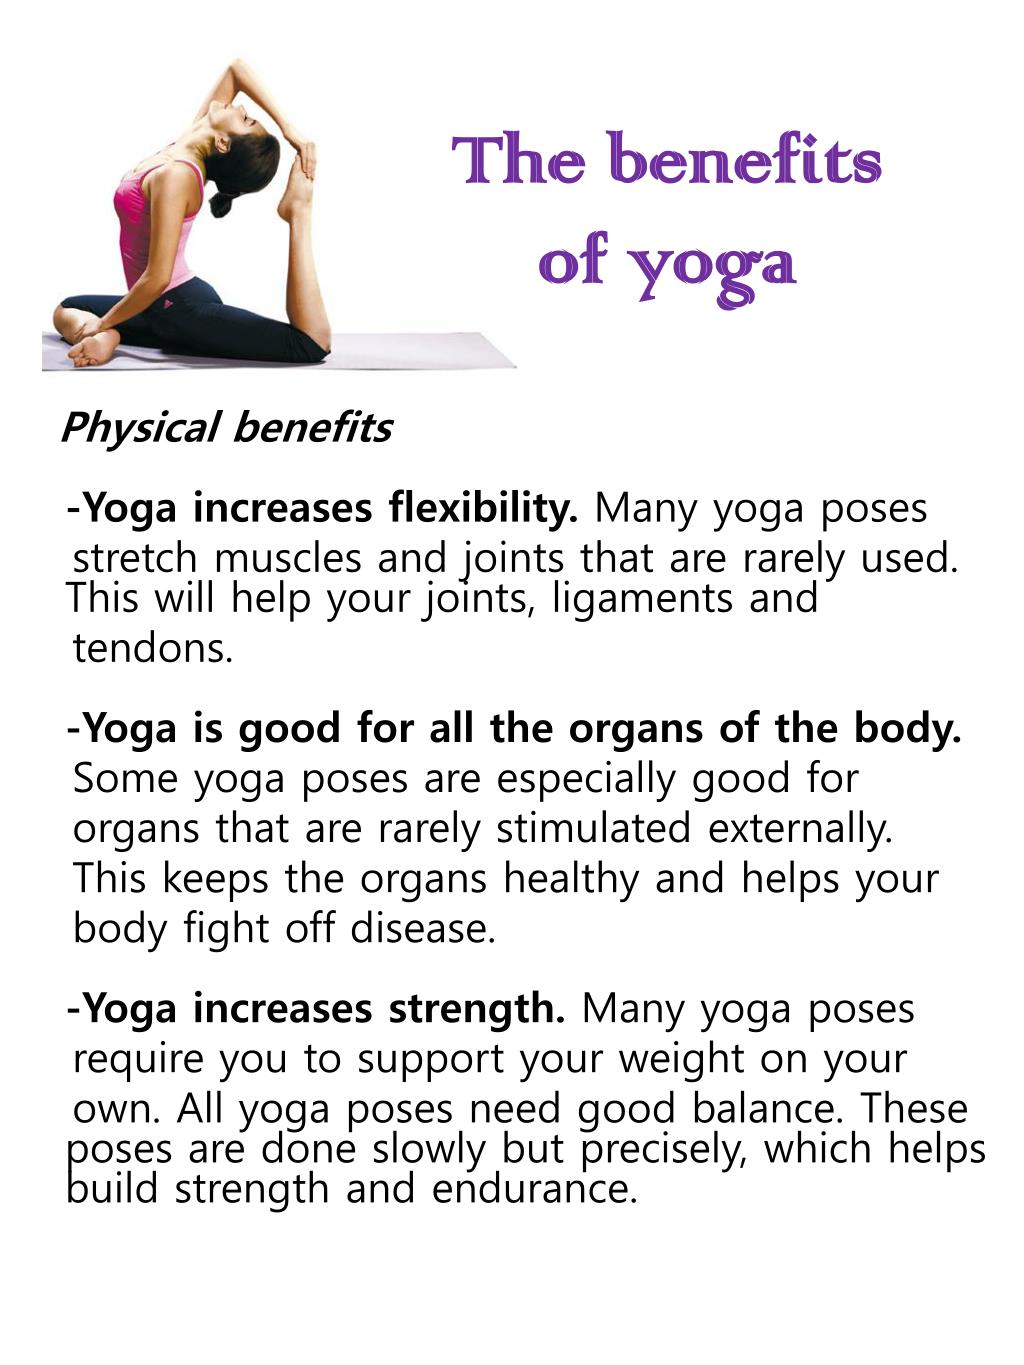 speech on yoga and its benefits